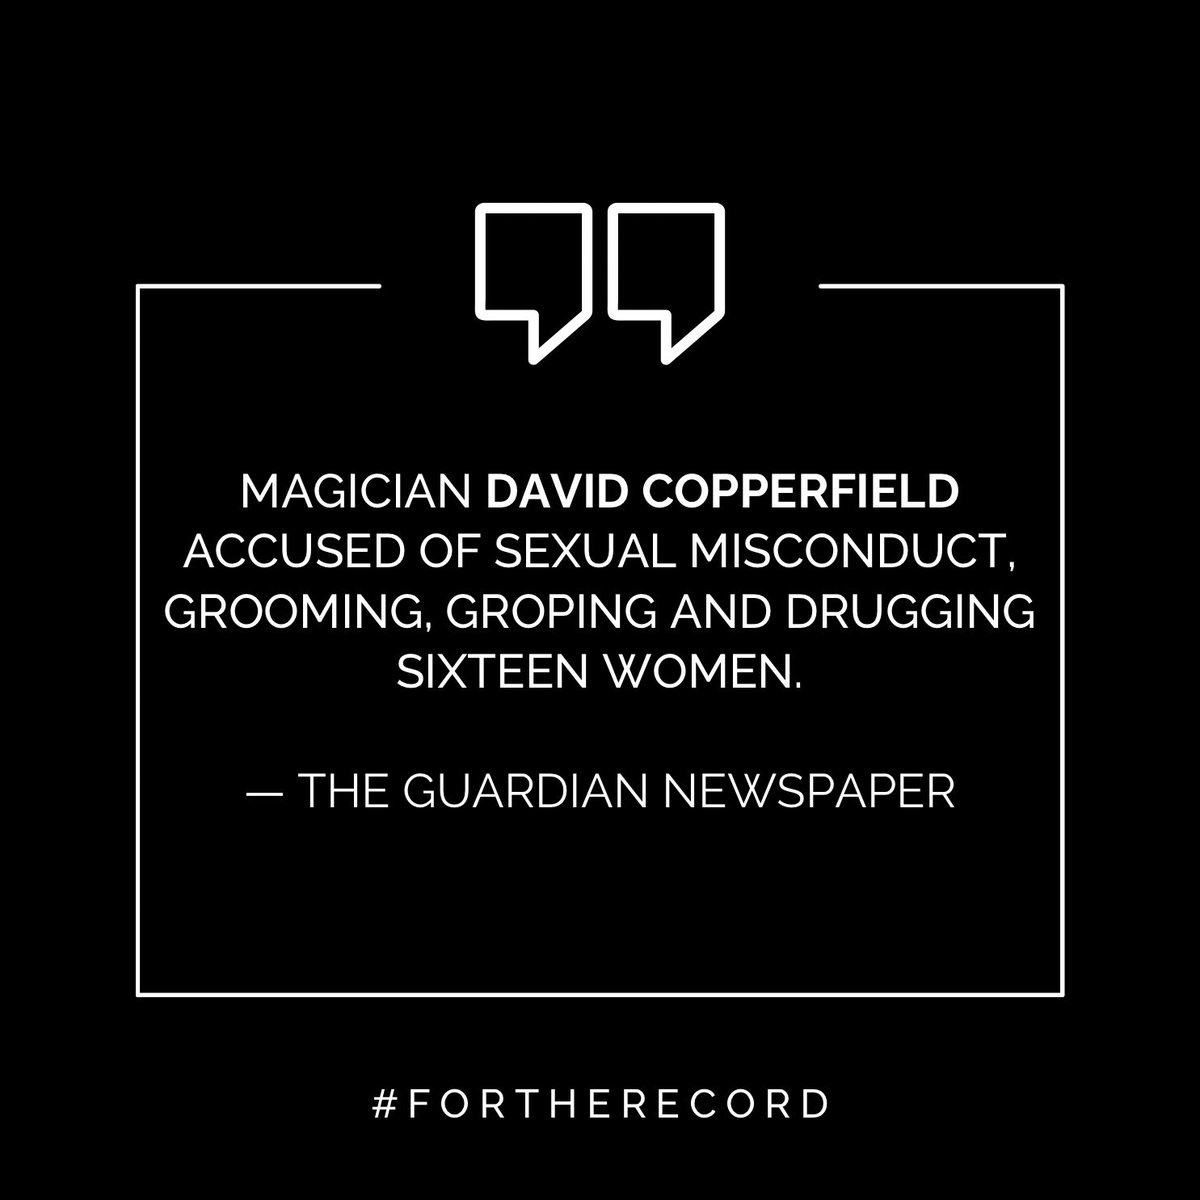 MAGICIAN DAVID COPPERFIELD ACCUSED OF SEXUAL MISCONDUCT,  GROOMING, GROPING AND DRUGGING SIXTEEN WOMEN.

— THE GUARDIAN NEWSPAPER
#FORTHERECORD #DAVIDCOPPERFIELD